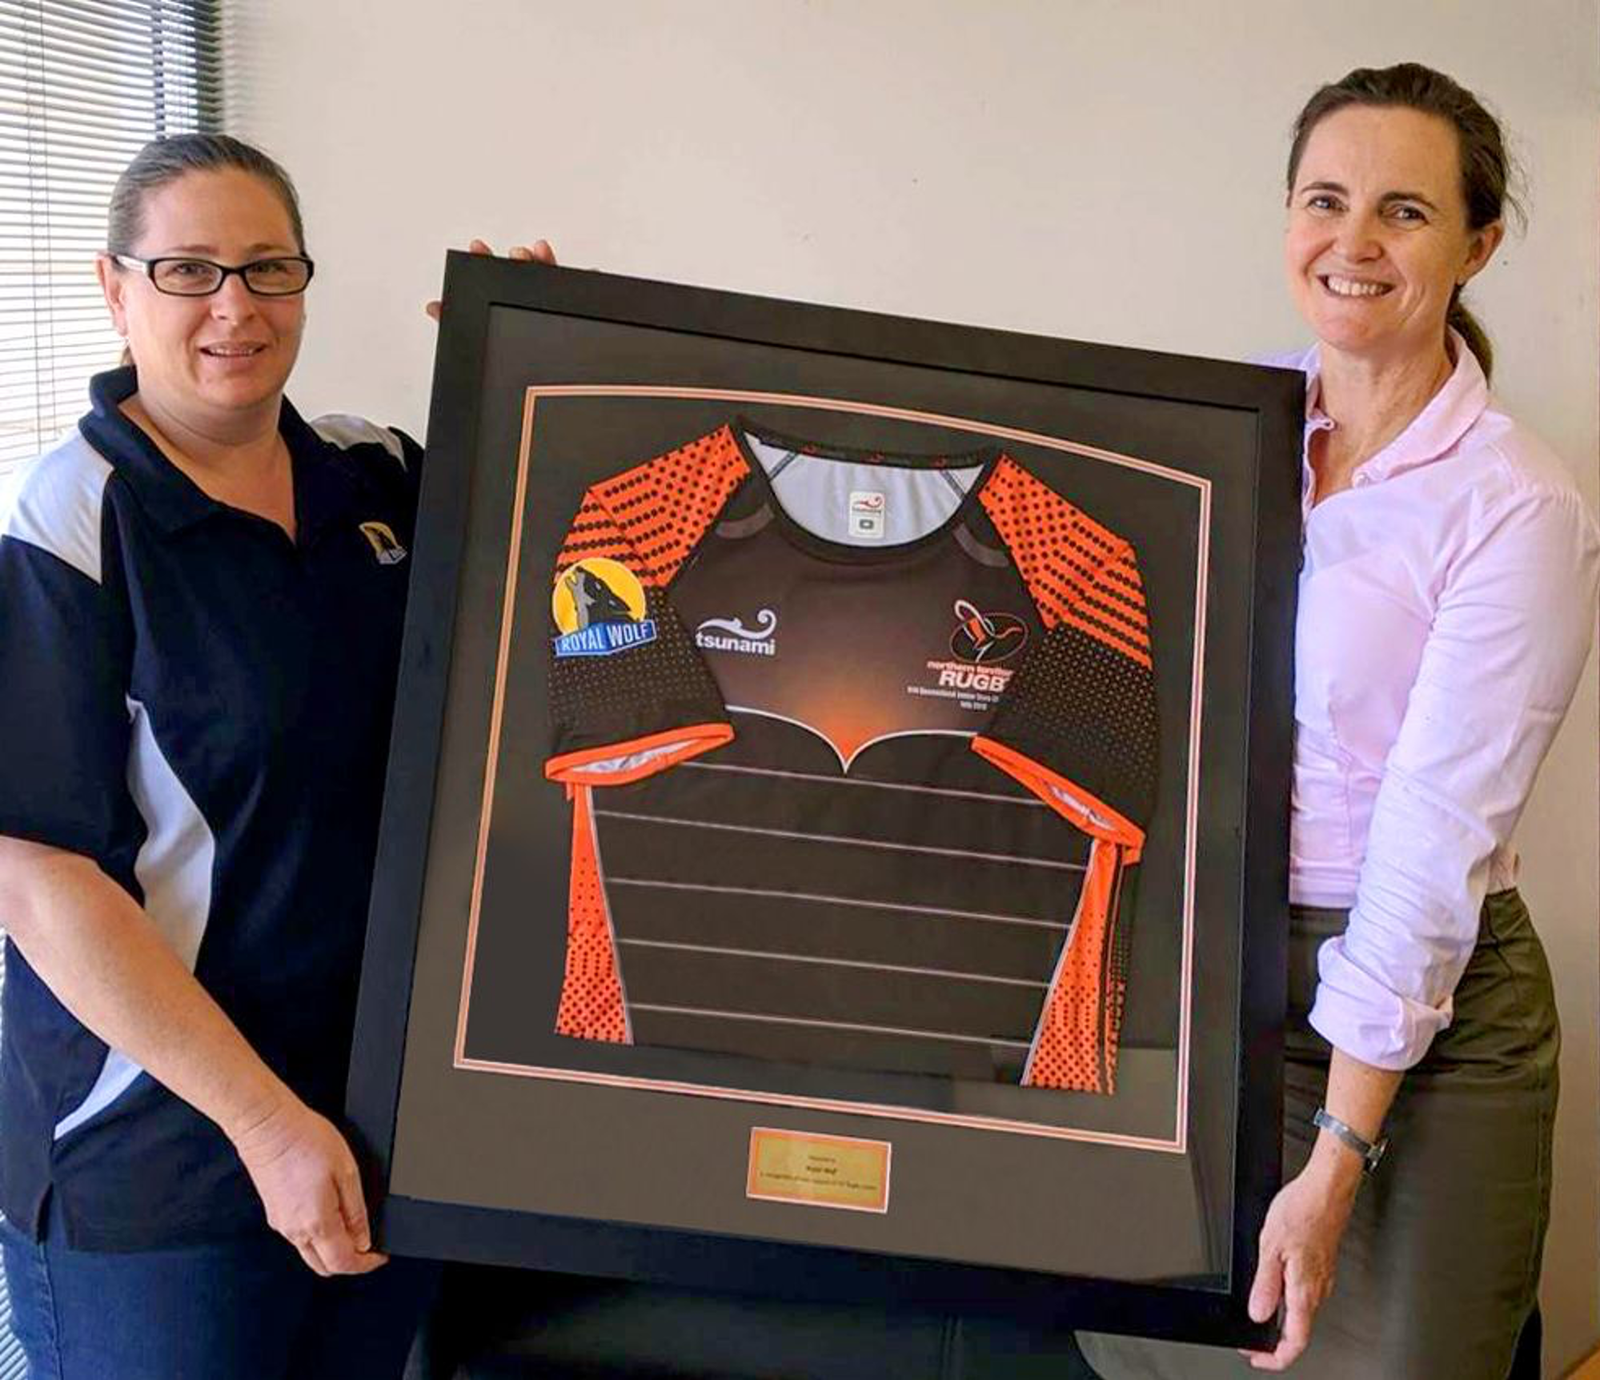 ROYAL WOLF SUPPORTS ANNUAL NORTHERN TERRITORY RUGBY HOTTEST 7s COMPETITION